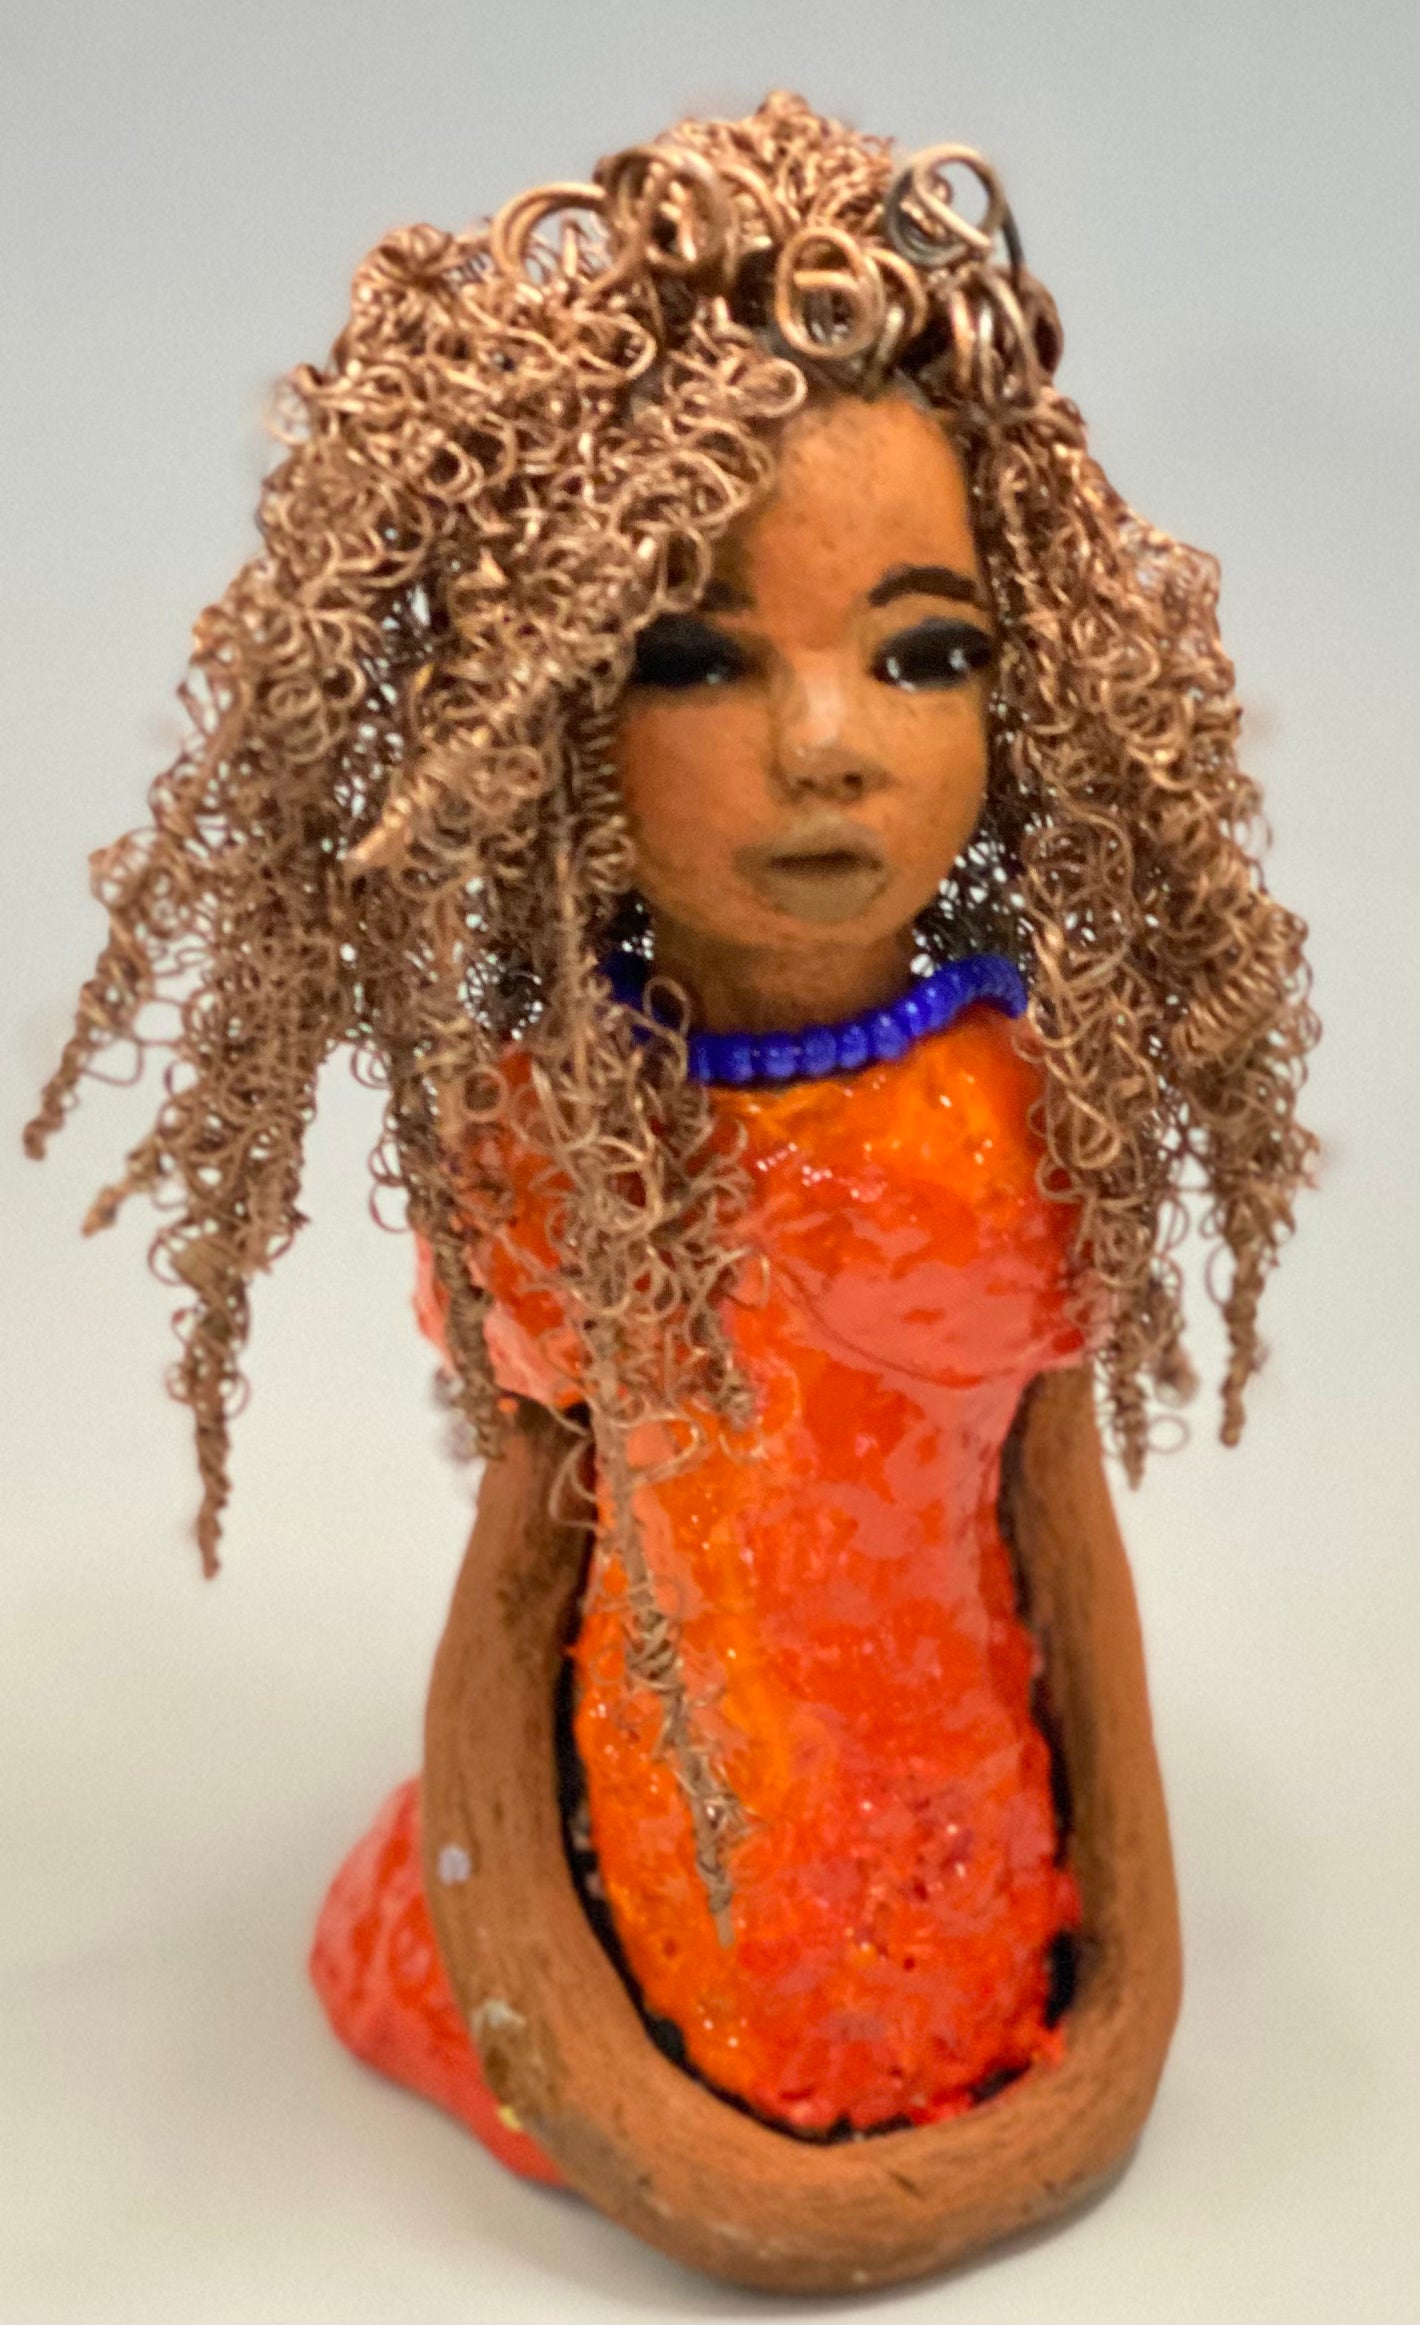 Meet Jada! Jada stands 8" x 3.5" x 3.5" and weighs 1 lb. She has a lovely honey brown complexion. Jada's dress is simply bright orange. She has her long loving arms resting at her side. " I am really pleased with Jada's blue beaded necklace and her new wire hair Find a place in your space for Jada!